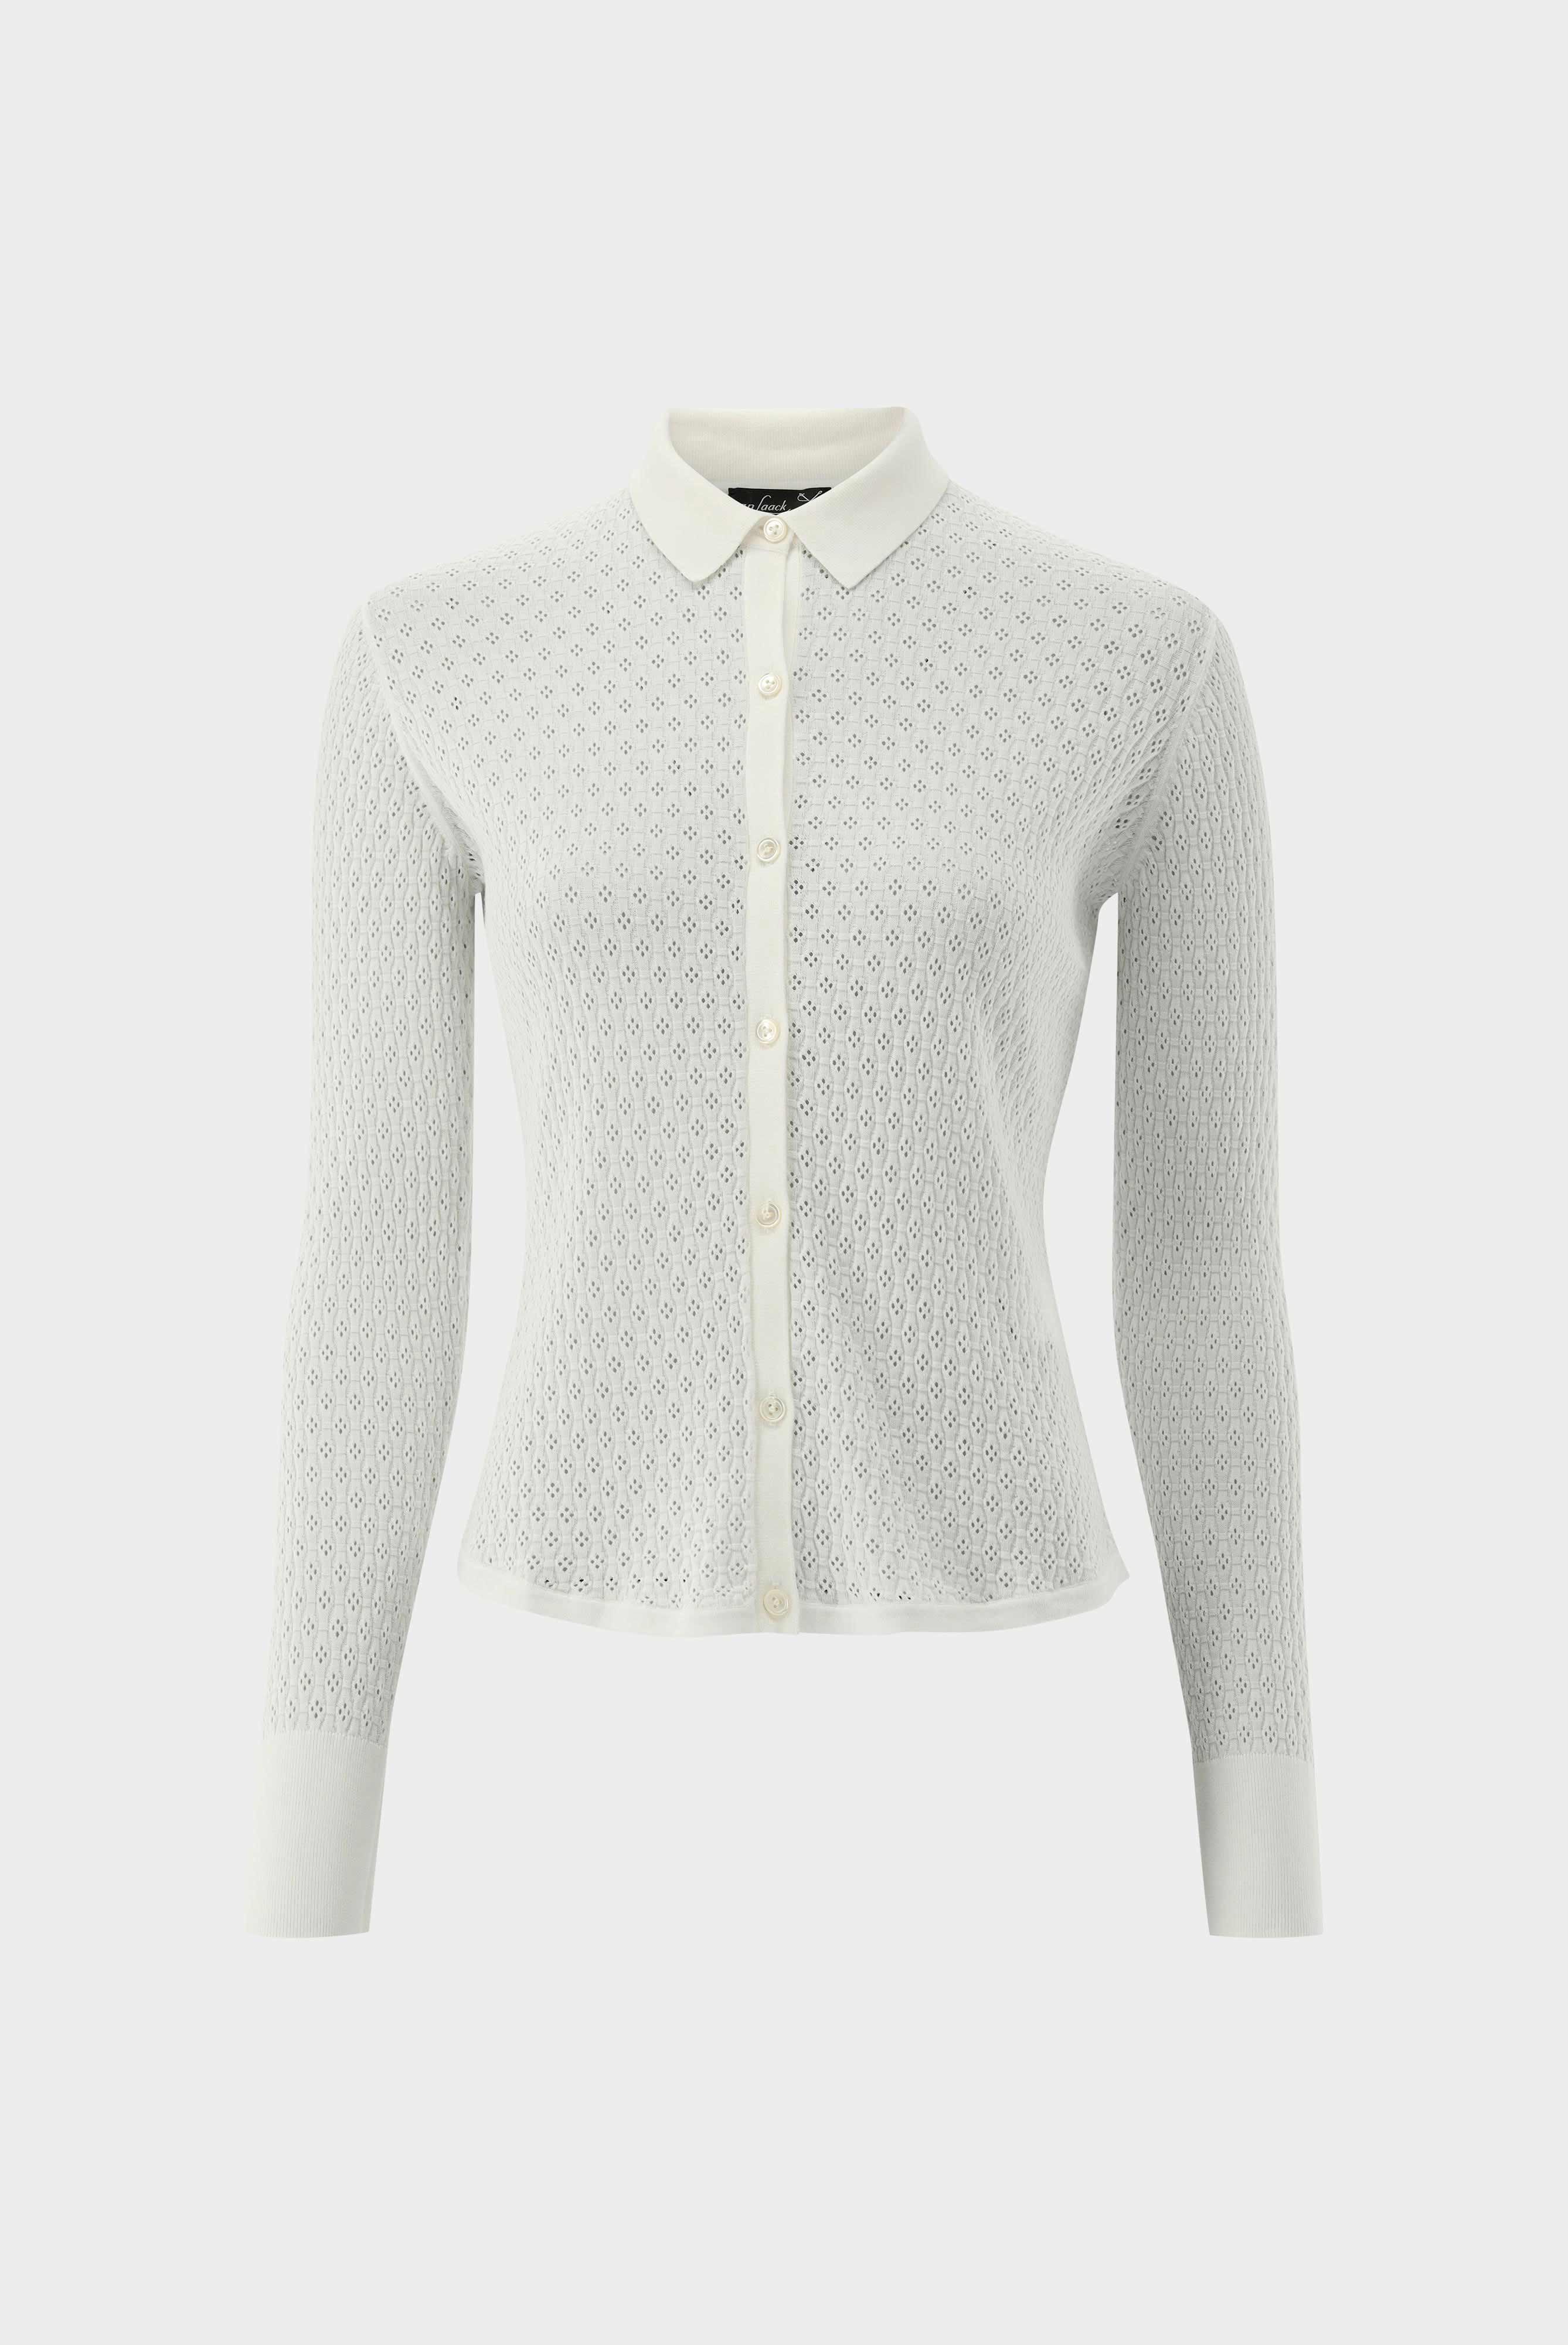 Casual Blouses+Knit Shirt with Lace Pattern in Air Cotton+09.9990..S00253.100.XS